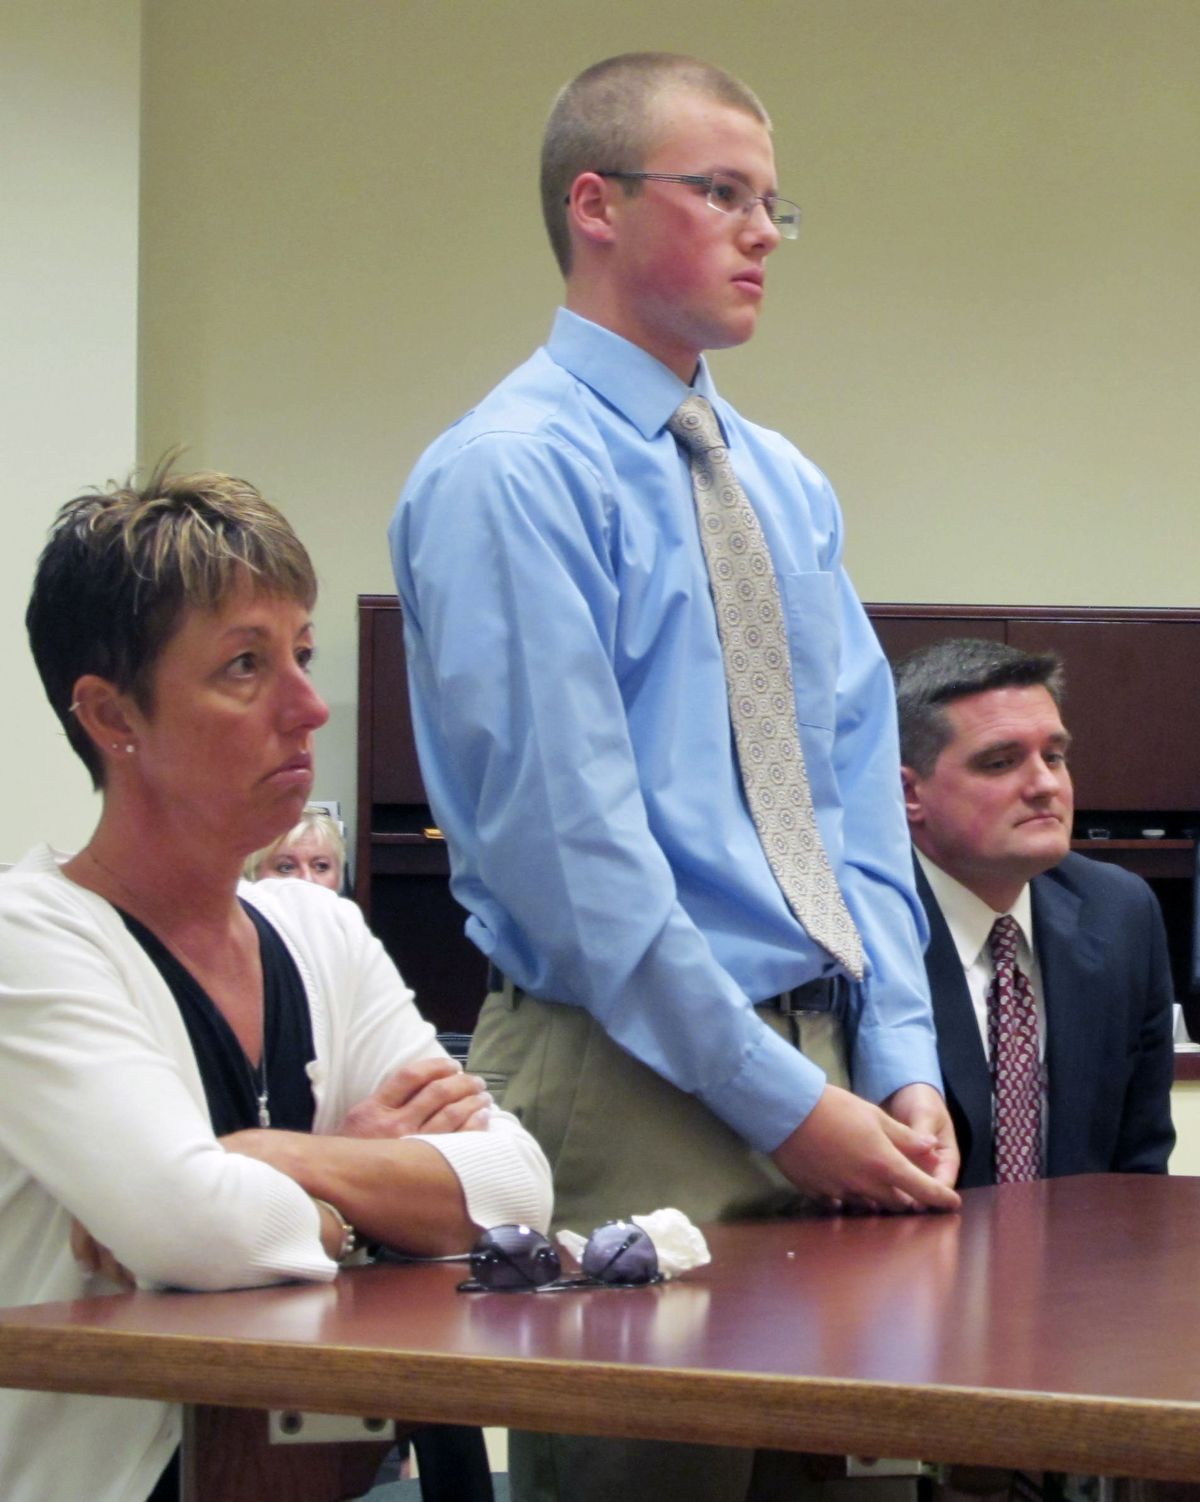 Tyler Pagenstecher, 18, center, listens in juvenile court, Monday, Oct. 22, 2012, in Lebanon, Ohio, as a judge sentences him to a minimum of six months in a juvenile jail stemming from his conviction on drug-trafficking charges. Pagenstecher is flanked by his mother, 50-year-old Daffney Pagenstecher, and his attorney, Mike O